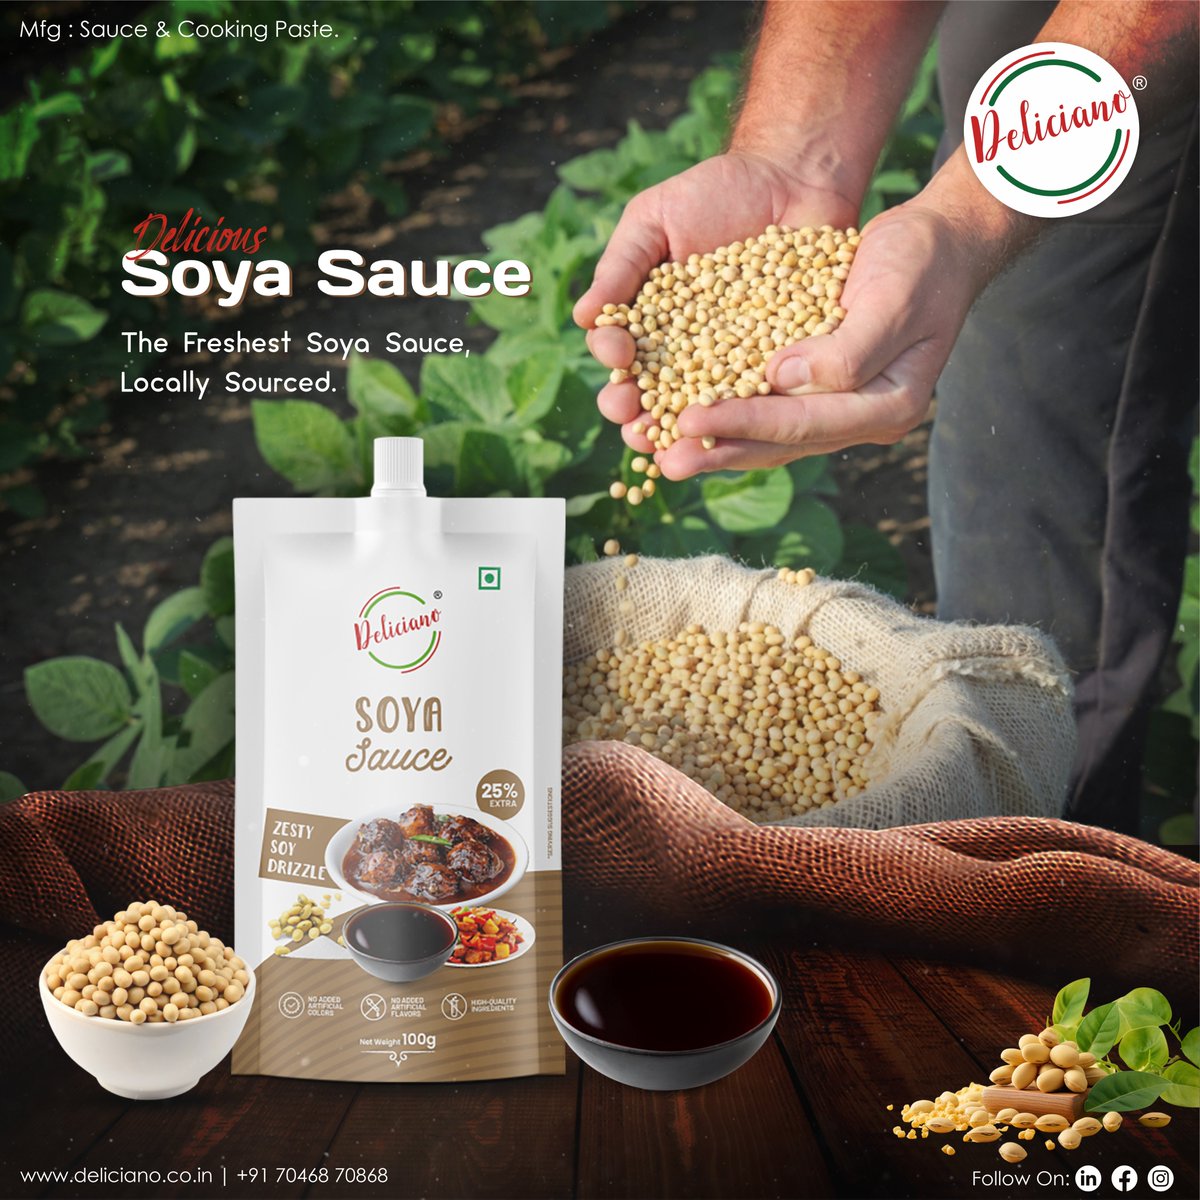 Delicious Soya Sauce

The Freshest Soya Sauce, Locally Sourced.

#deliciano #soyasauce #soya #sauce #farmfresh #fresh #locallysourced #supportlocal #delicious #taste #cooking #food #hotel #indianfood #rajkot #india #makeinindia #madeinindia

deliciano.co.in